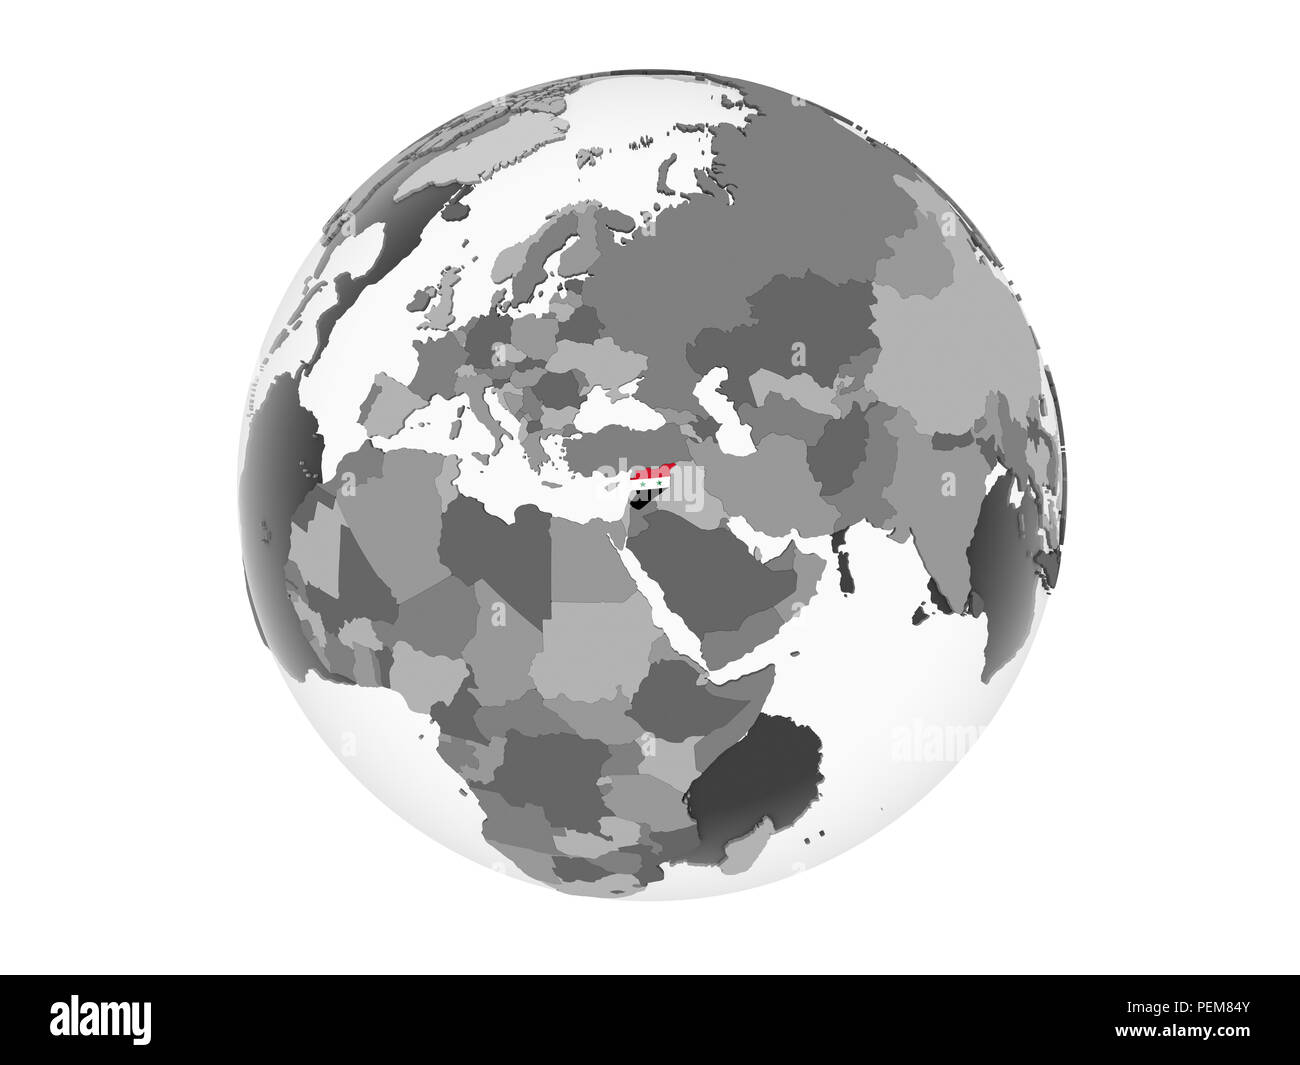 Syria on gray political globe with embedded flag. 3D illustration isolated on white background. Stock Photo